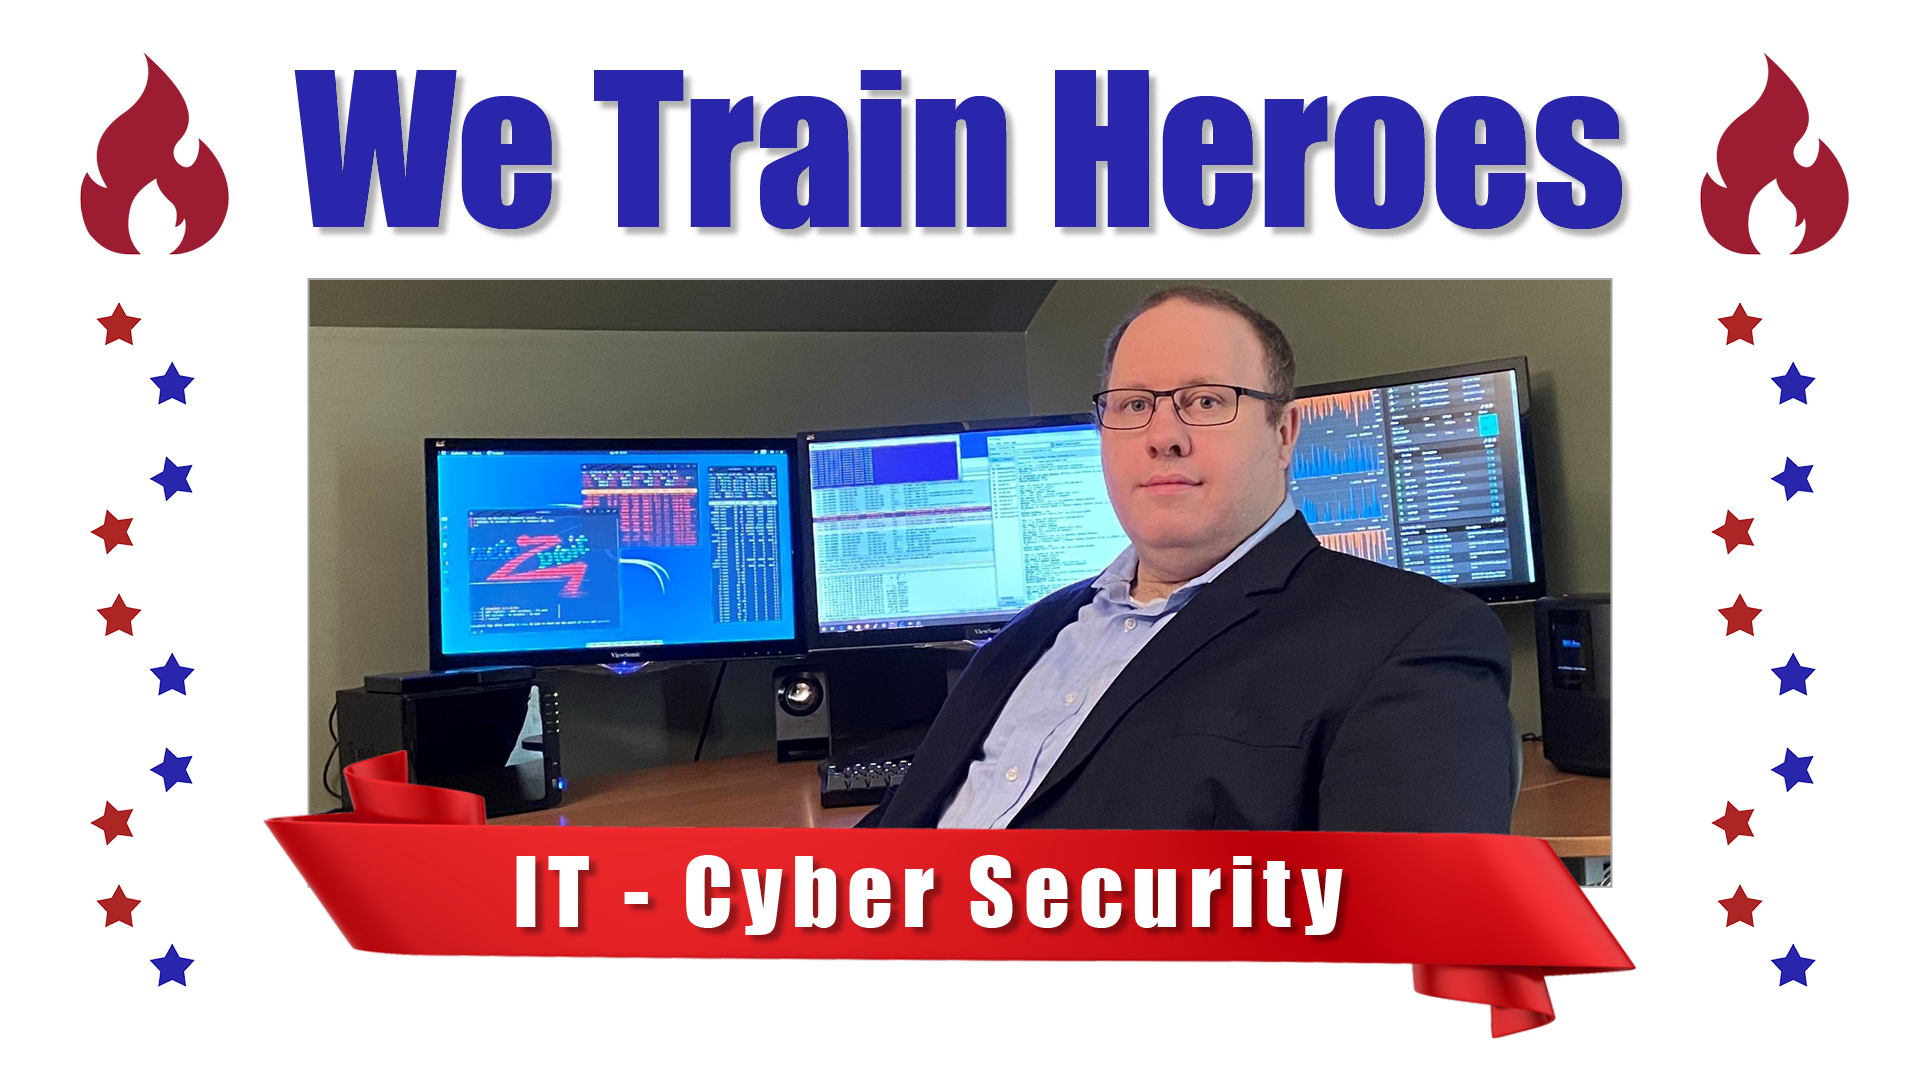 Cyber Security instructor Brian Goodman is featured in a We Train Heroes graphic